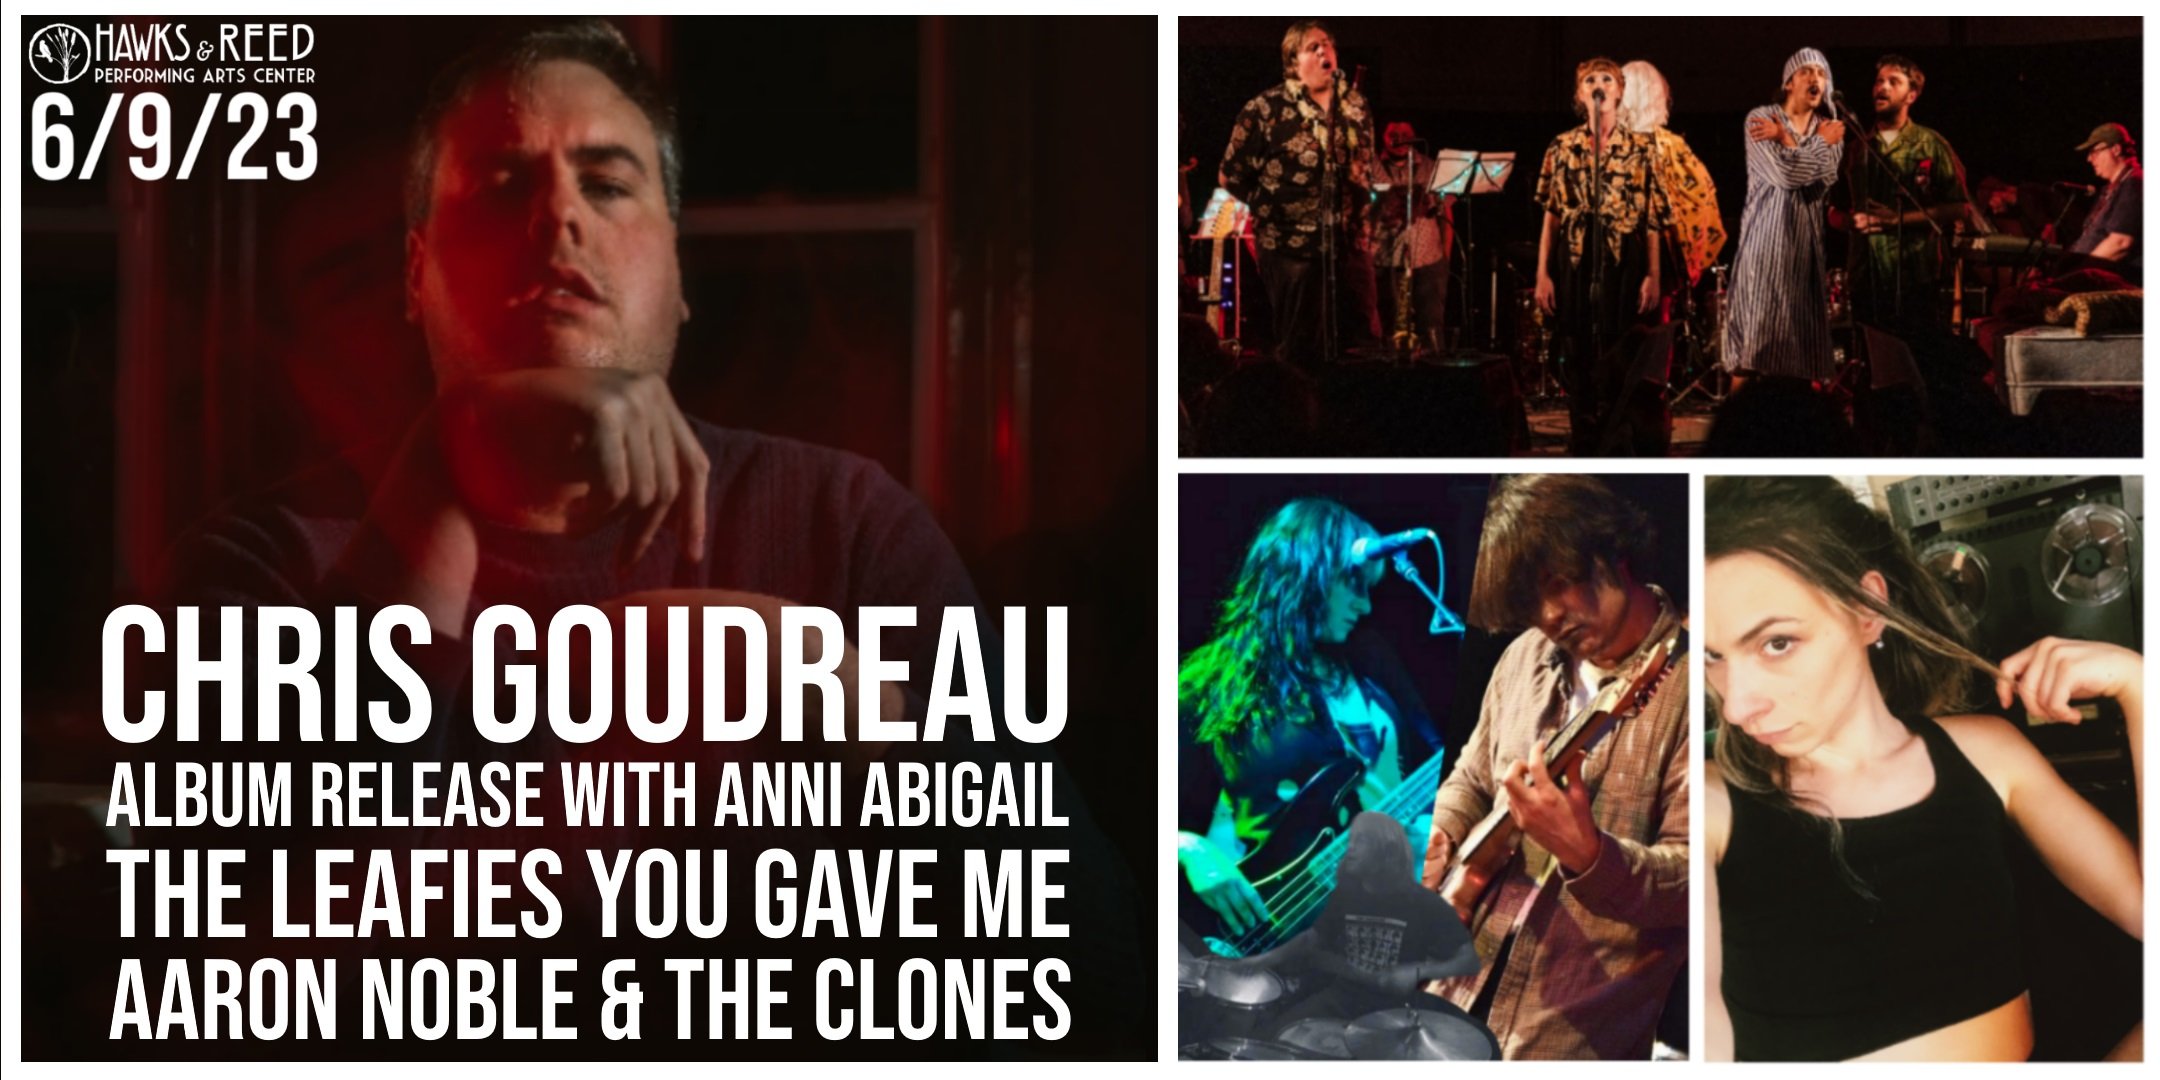 Chris Goudreau Album Release with Anni Abigail, The Leafies You Gave Me, Aaron Noble and The Clones